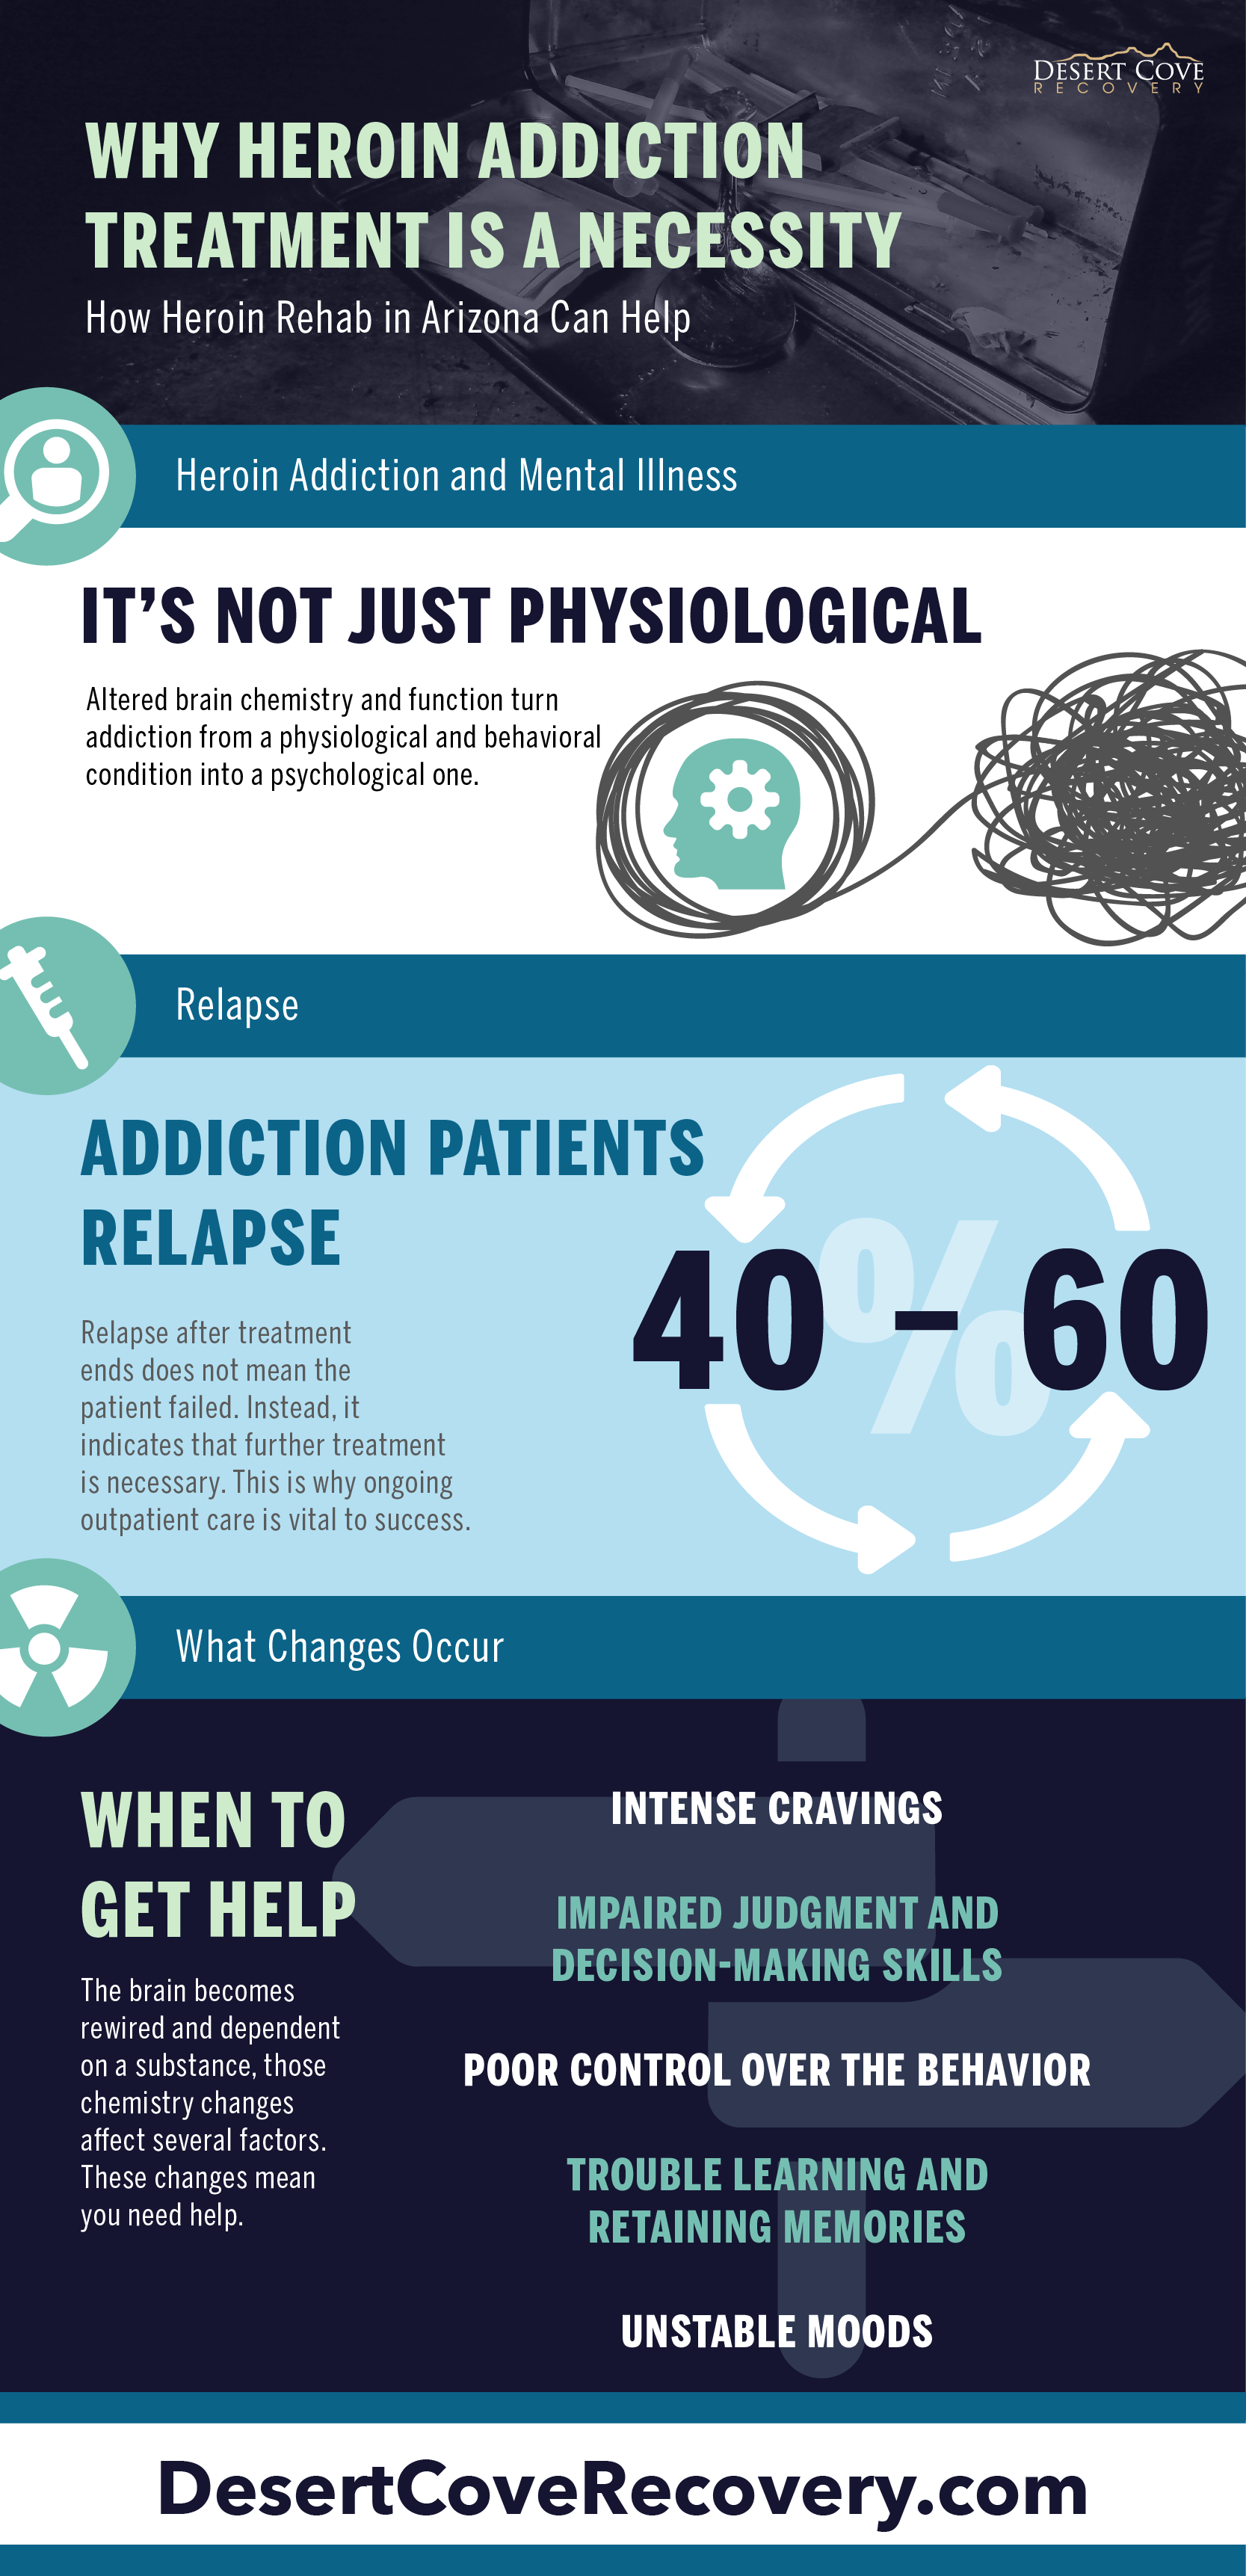 Heroin Addiction Treatment is a Necessity - How Heroin Rehab in Arizona Can Help